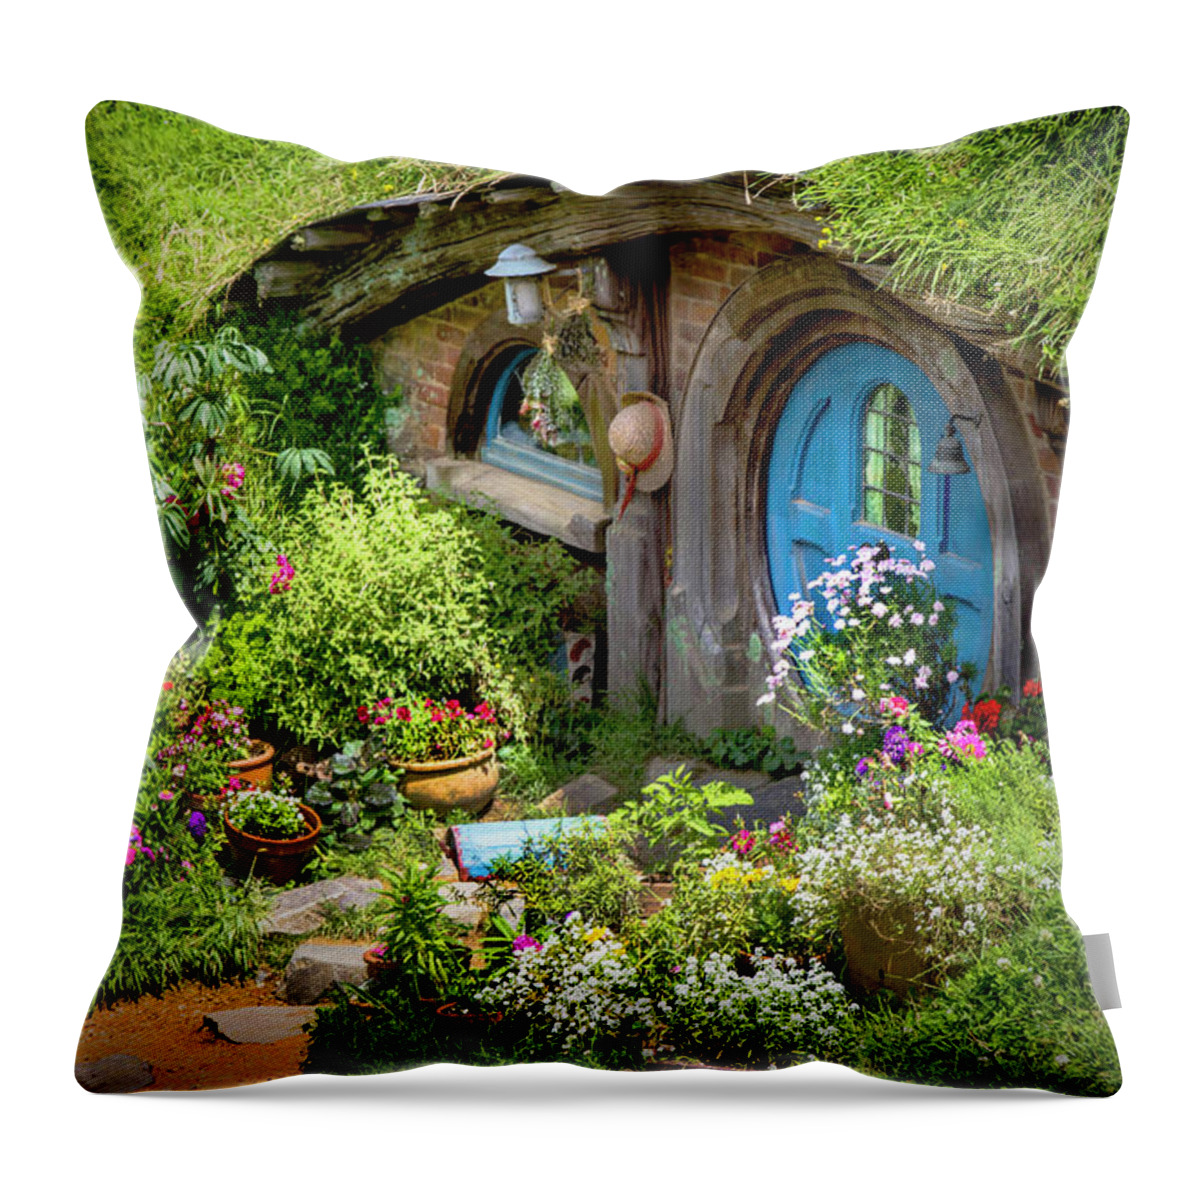 Hobbits Throw Pillow featuring the photograph A Pretty Hobbit Hole by Kathryn McBride